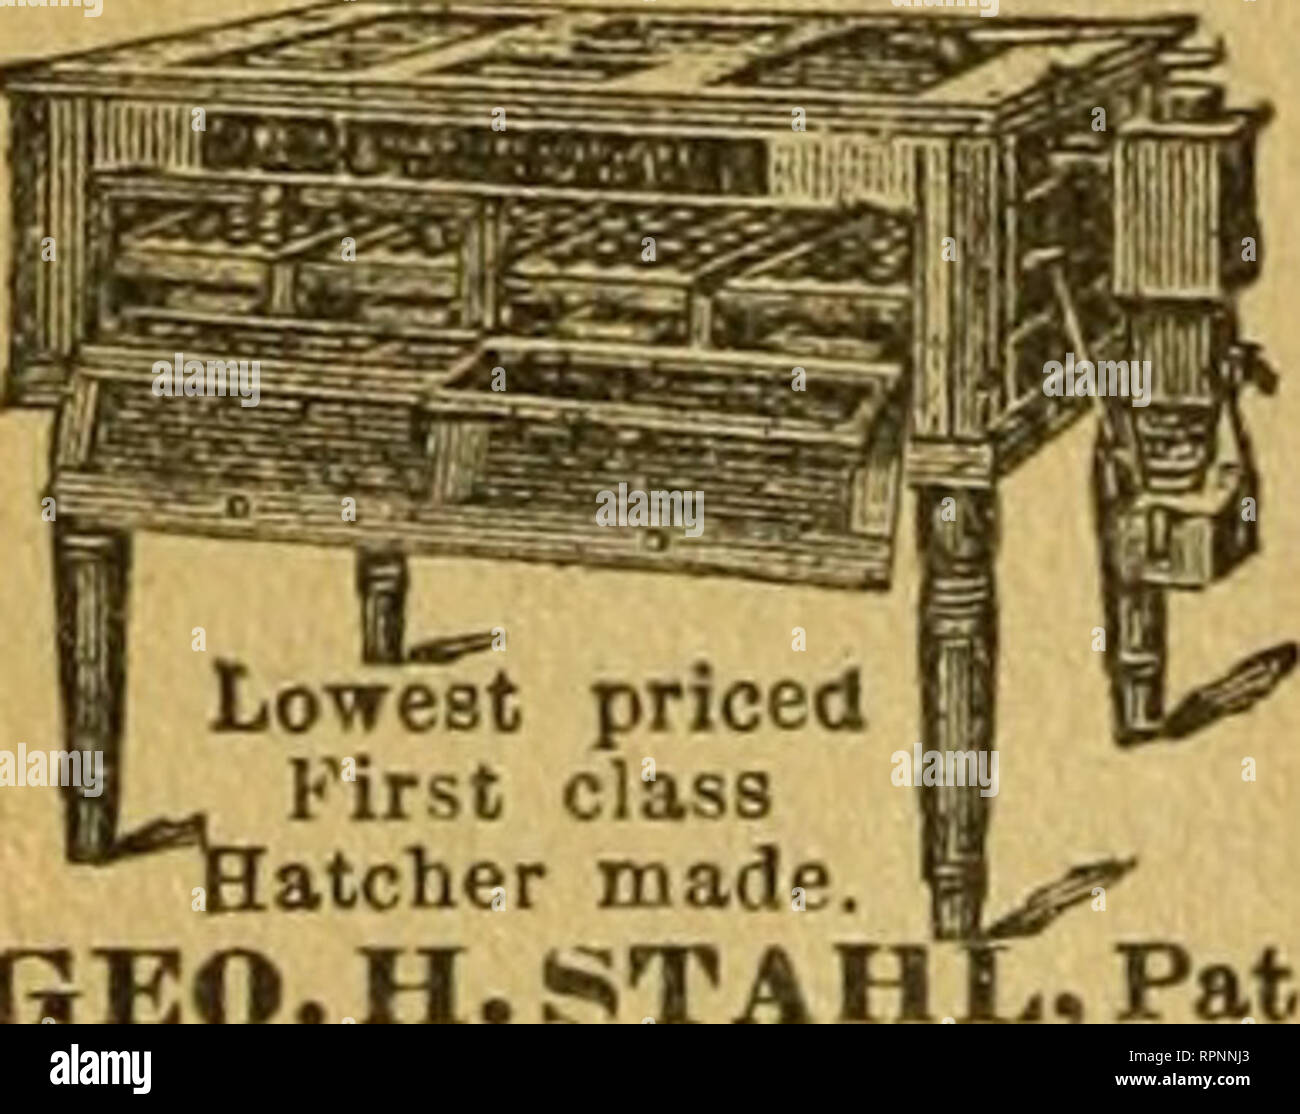 American bee journal. Bee culture; Bees. HATCH CHICKENS BY STEAM WITH THE  IMPROVED EXCELSIOR INCUBATOR.. Lowest priced First ell atelier n  GEO.H.STAFfl Thousands in Sue cessful Operation. SIMPLE, PERFECT, and SELF-